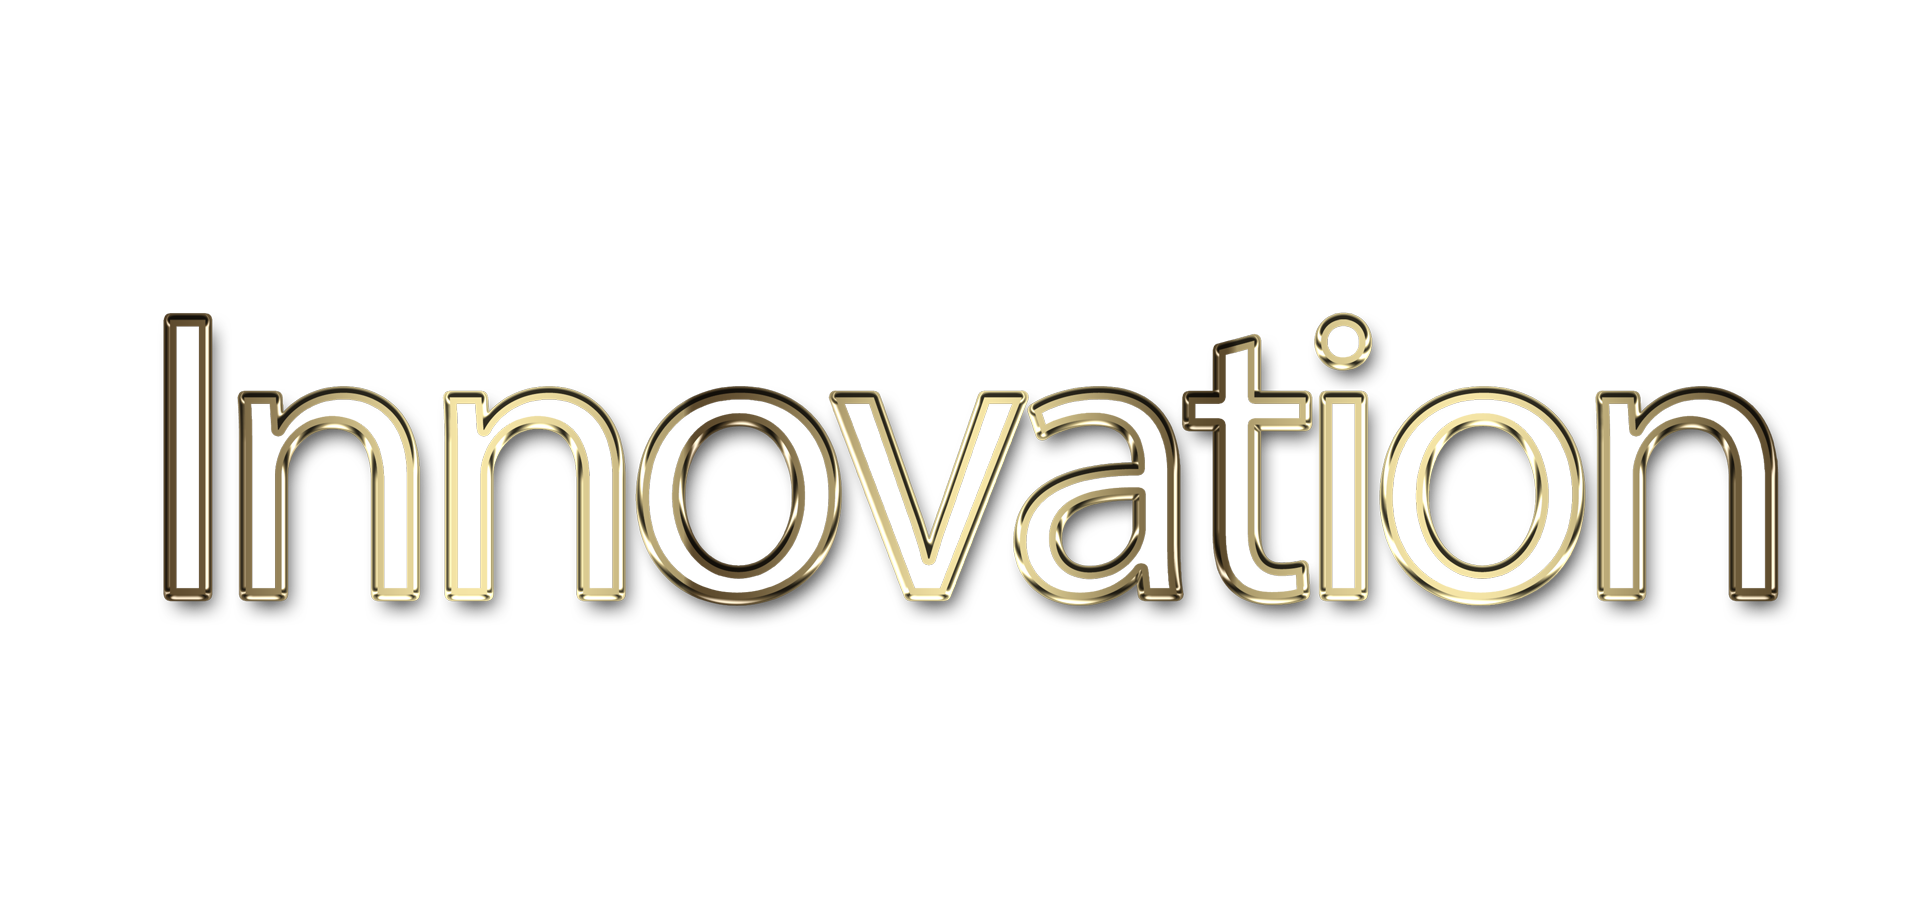 Innovation png, word Innovation png, Innovation word png, Innovation text png, Innovation letters png, Innovation word art typography PNG images, transparent png